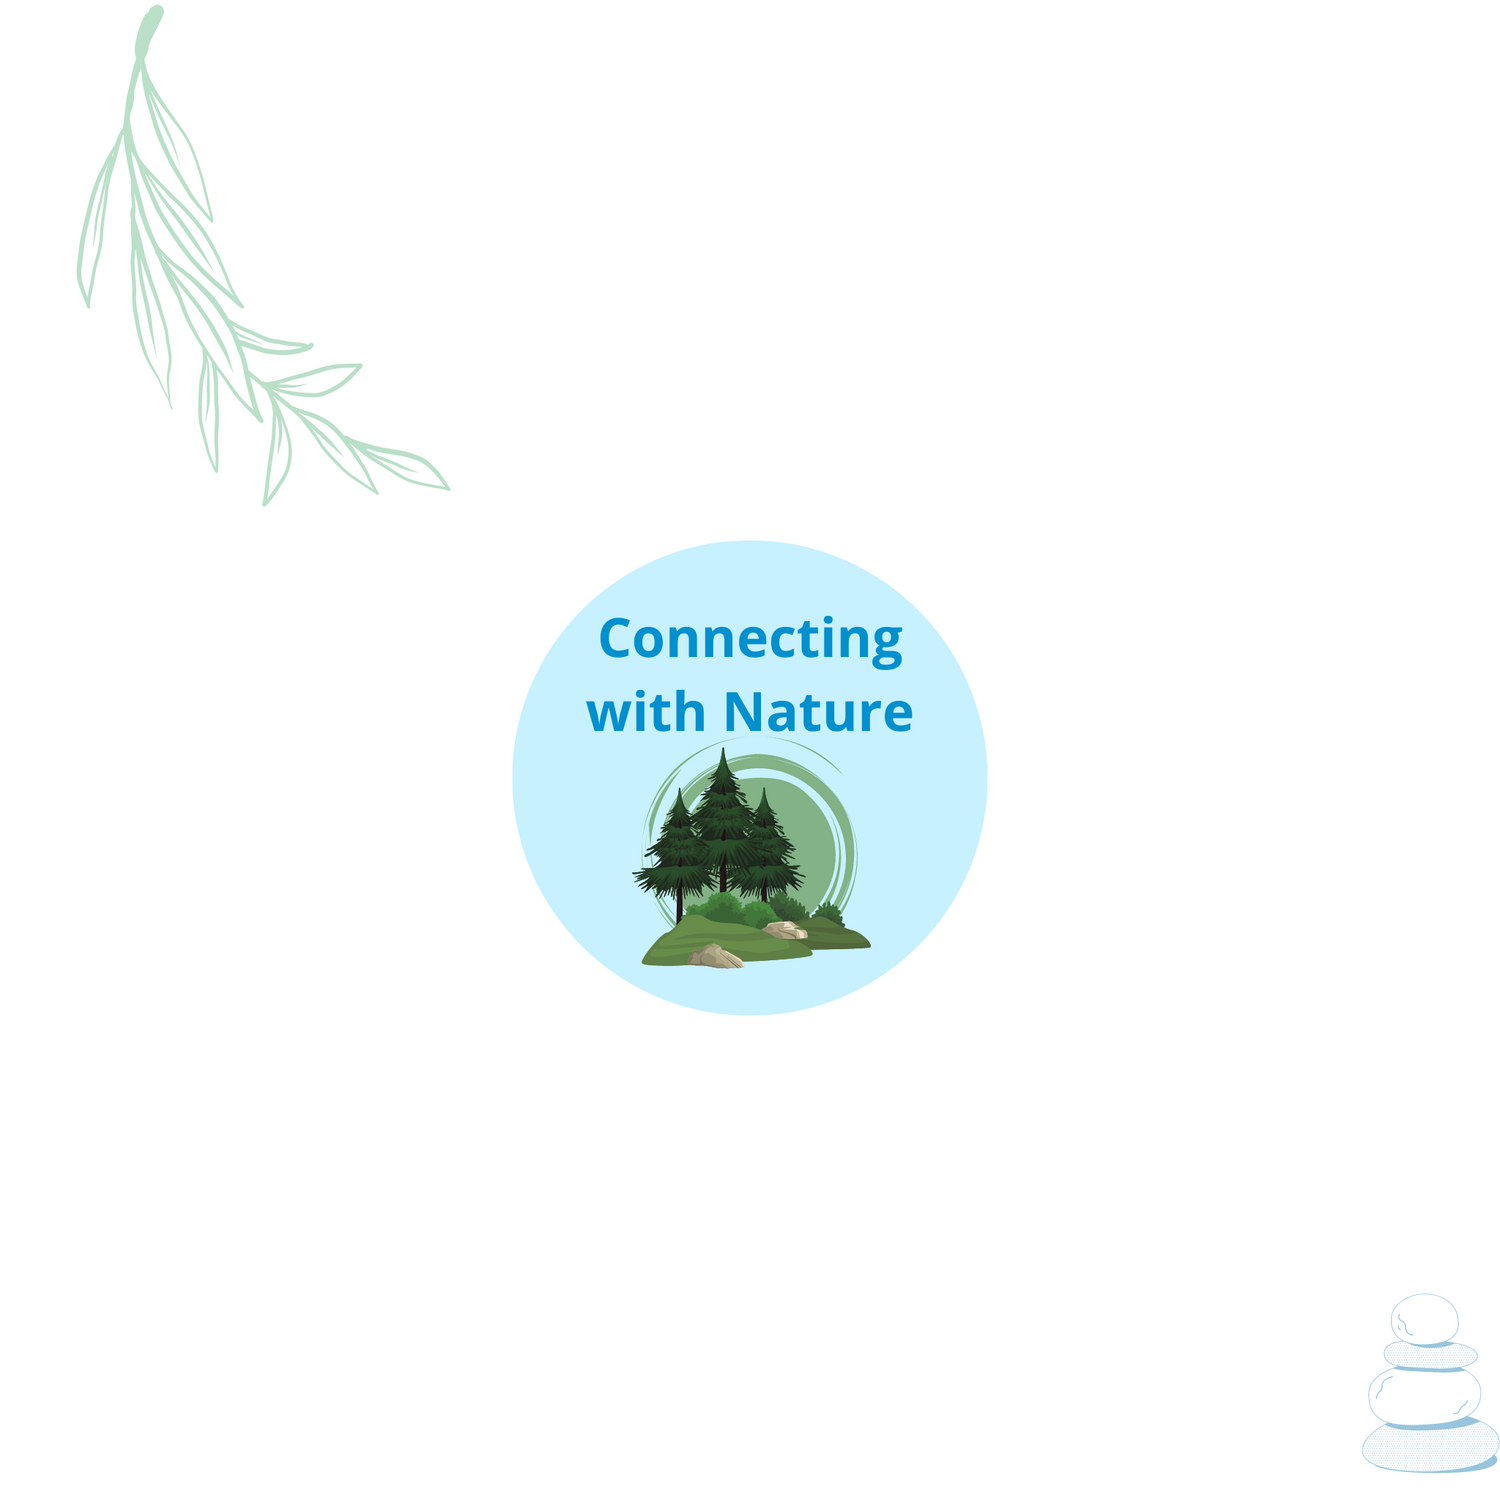 Connecting with Nature